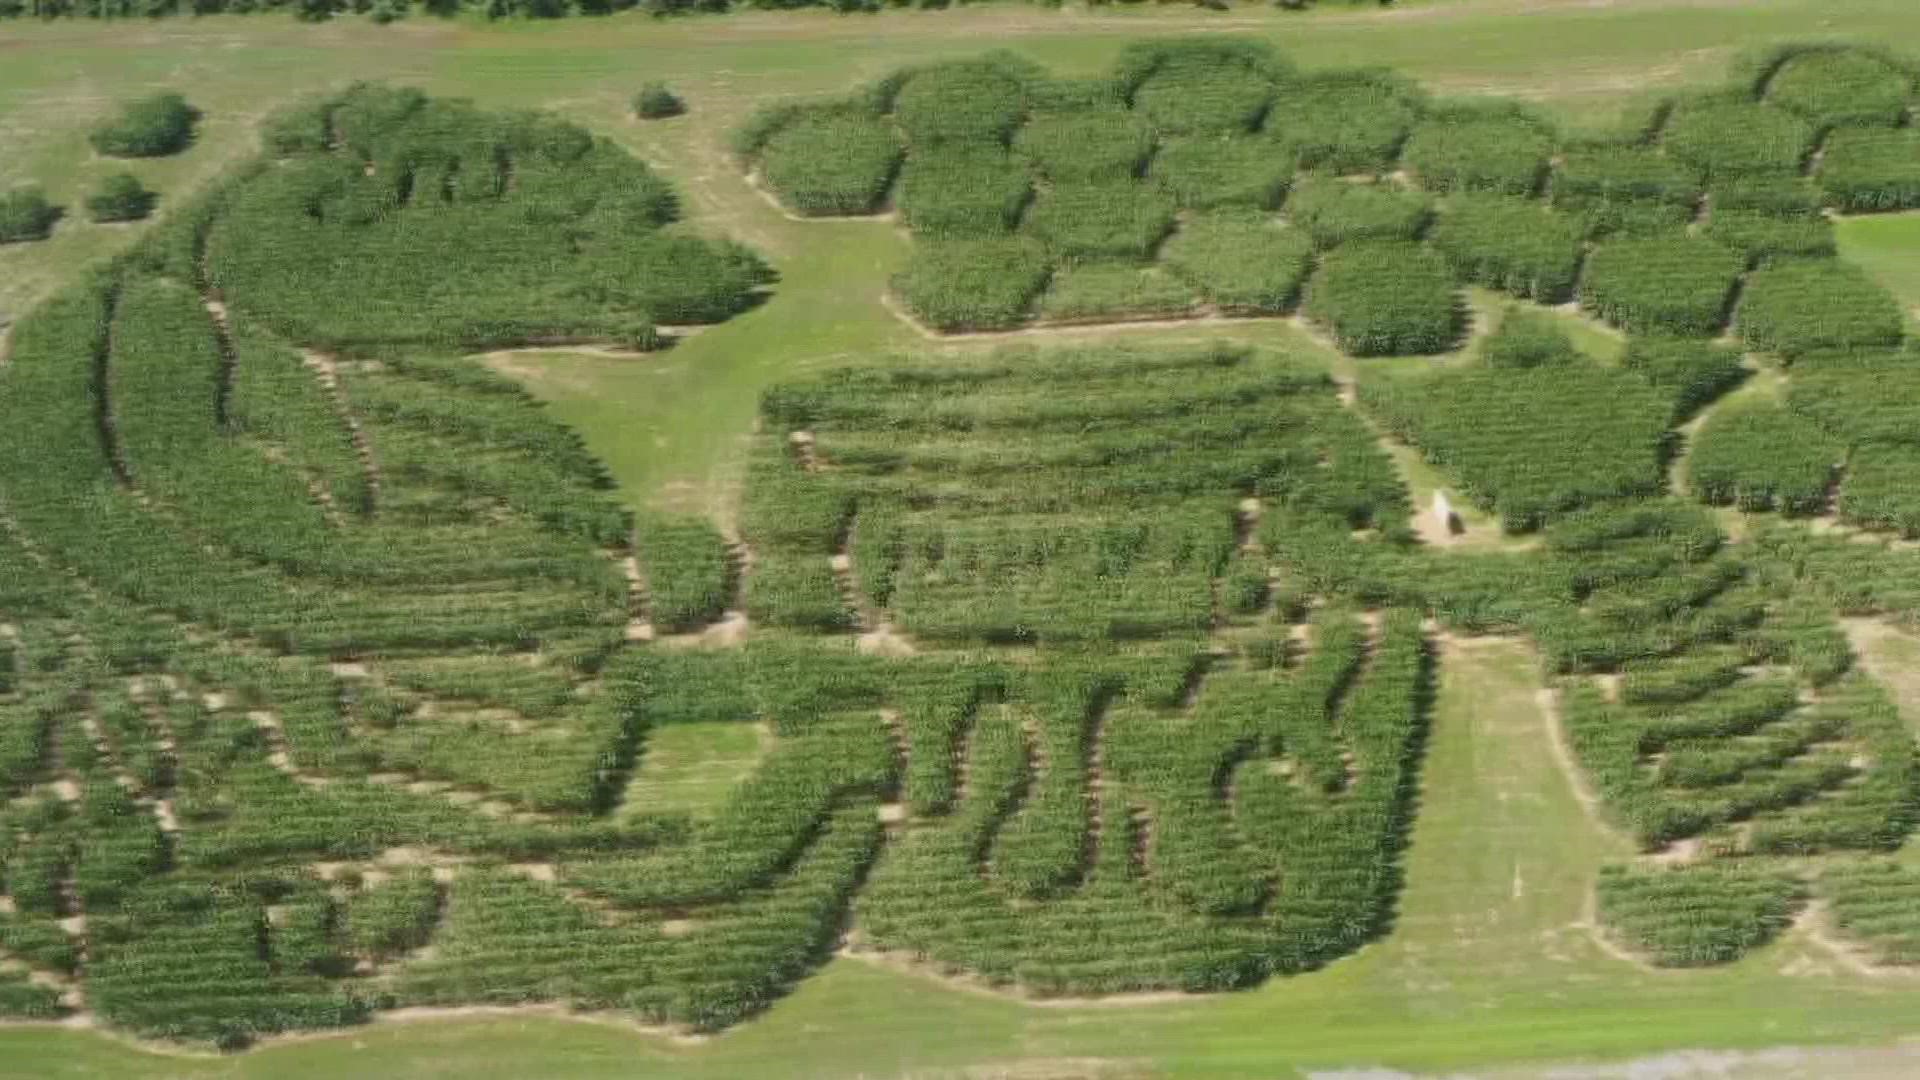 The Treworgy Family Orchards corn maze in Levant sits on four acres and has once again been nominated for the USA TODAY Best Corn Maze in the country.